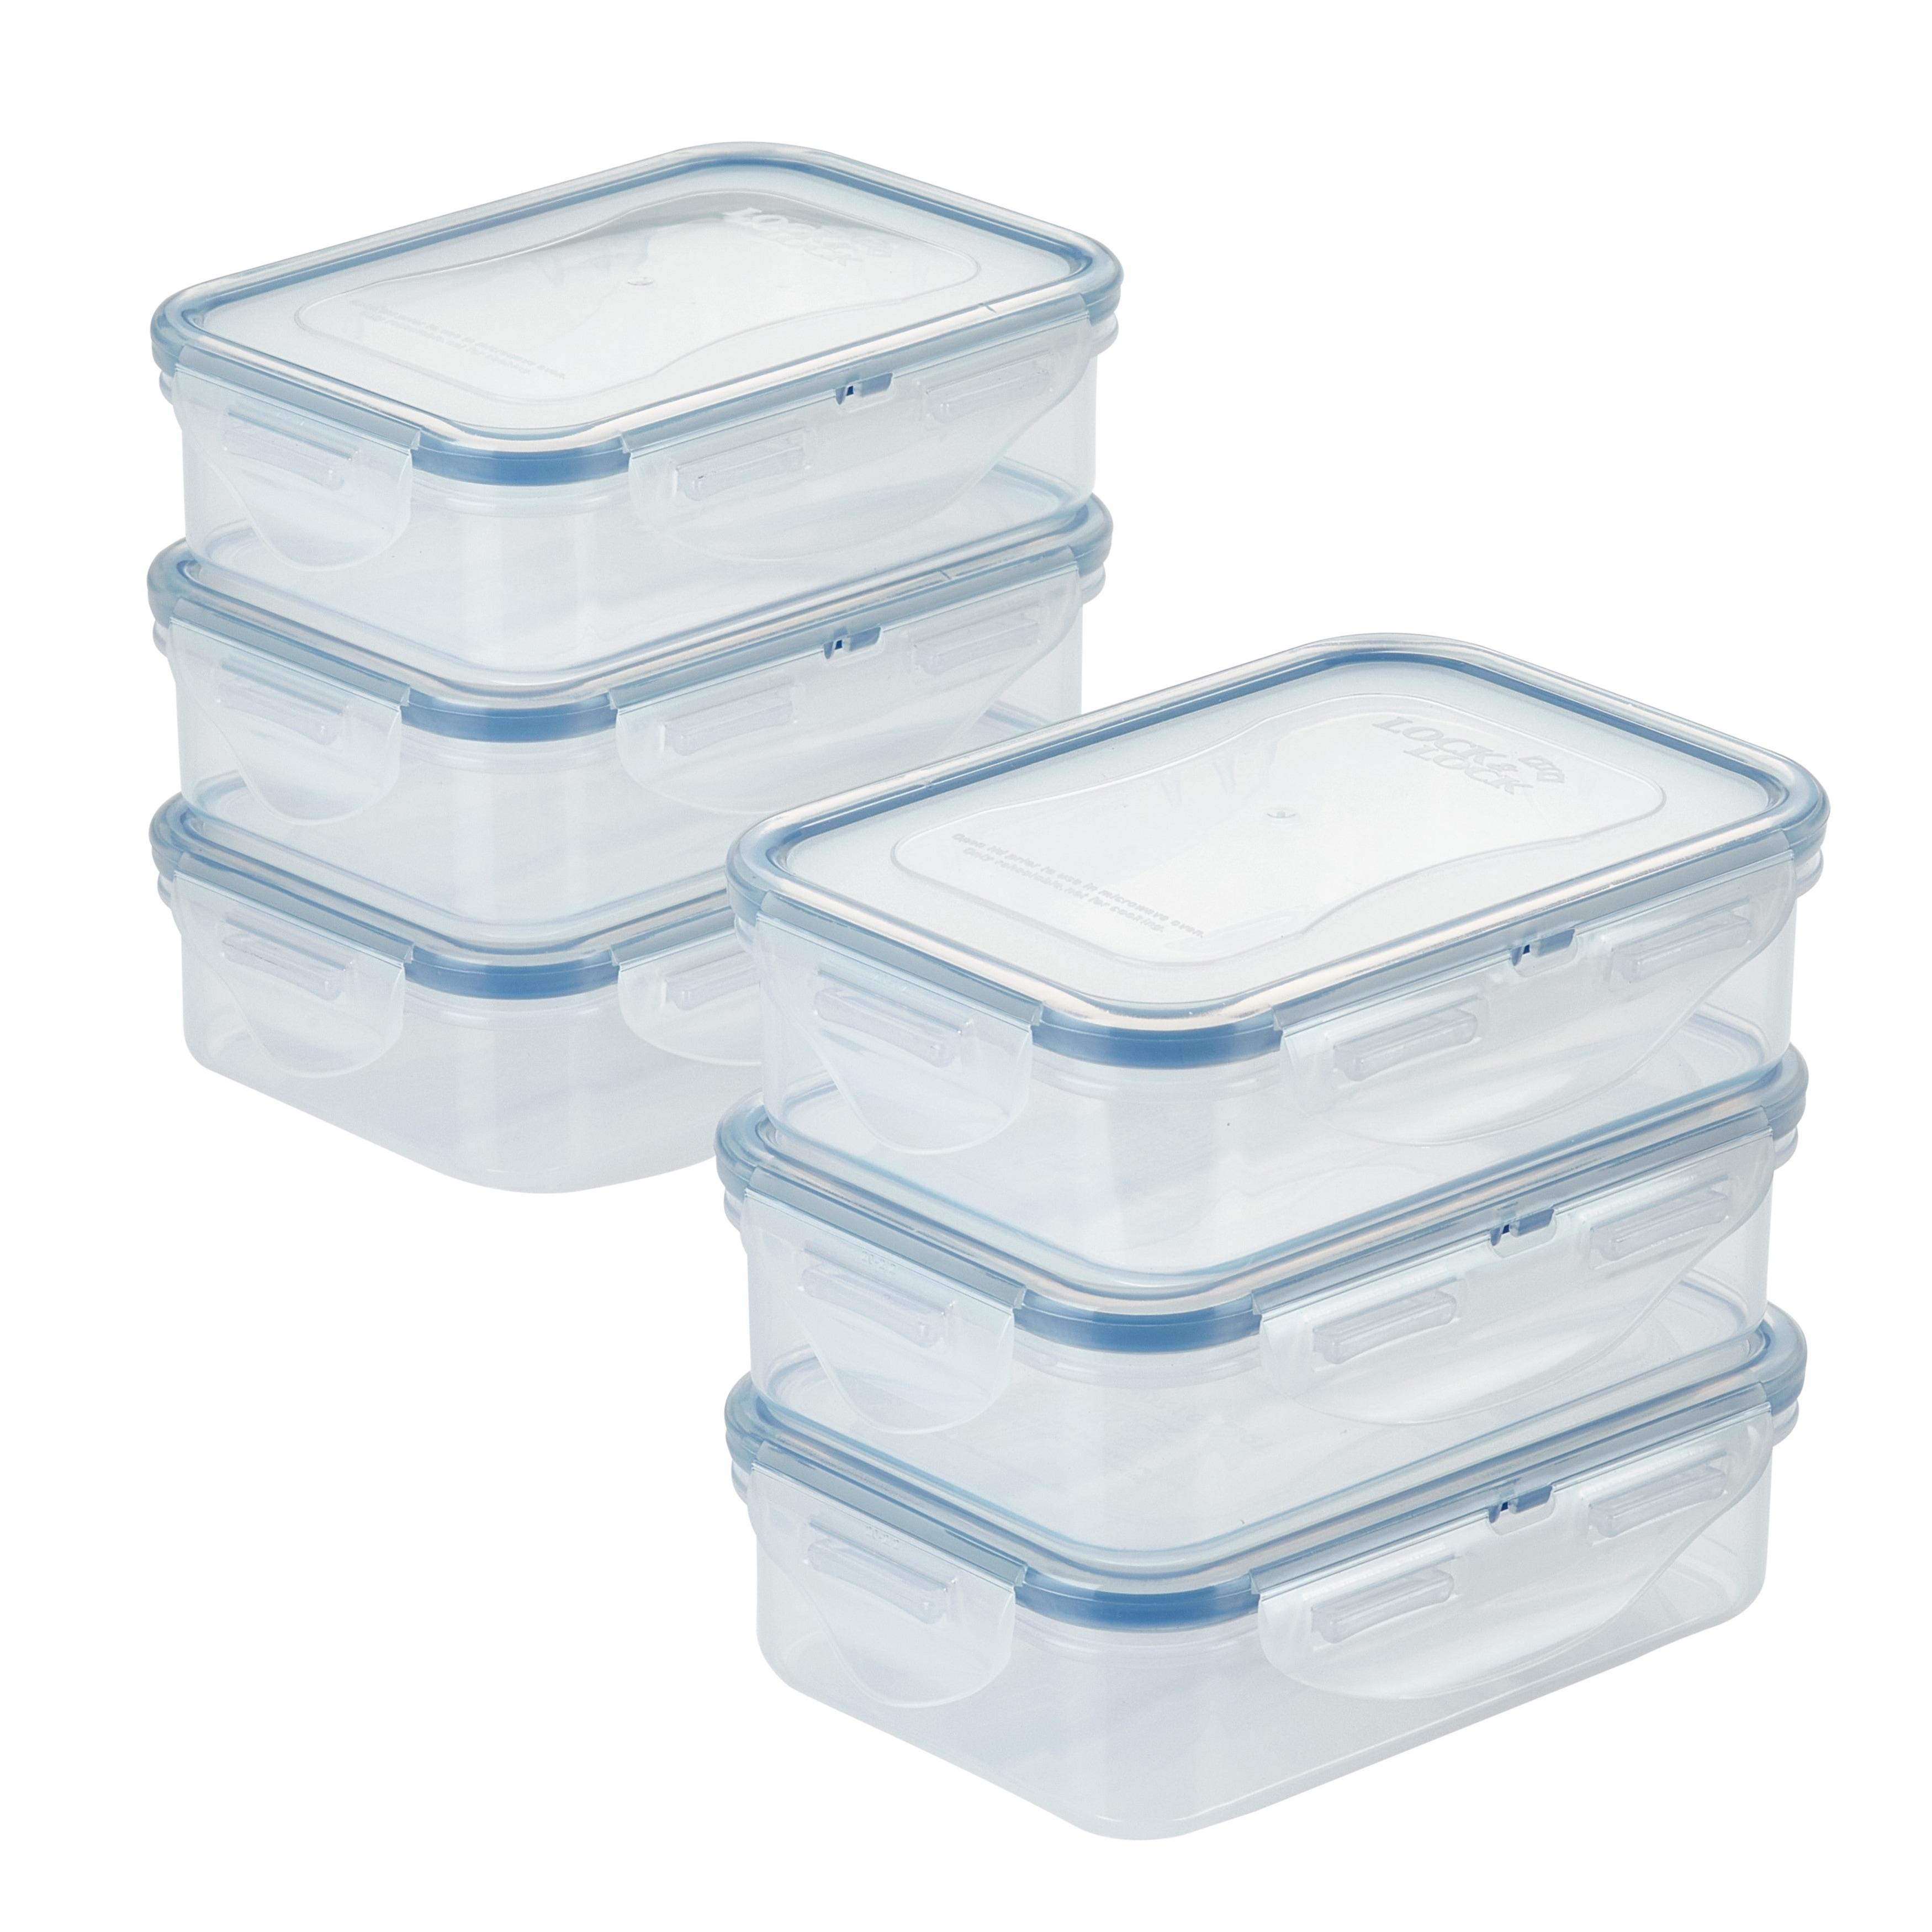 https://ak1.ostkcdn.com/images/products/is/images/direct/eb8b19e521283e86ad62565fe83fe2f4996973e4/Easy-Essentials-Rectangular-12-Ounce-Food-Storage-Container%2C-Set-of-6.jpg